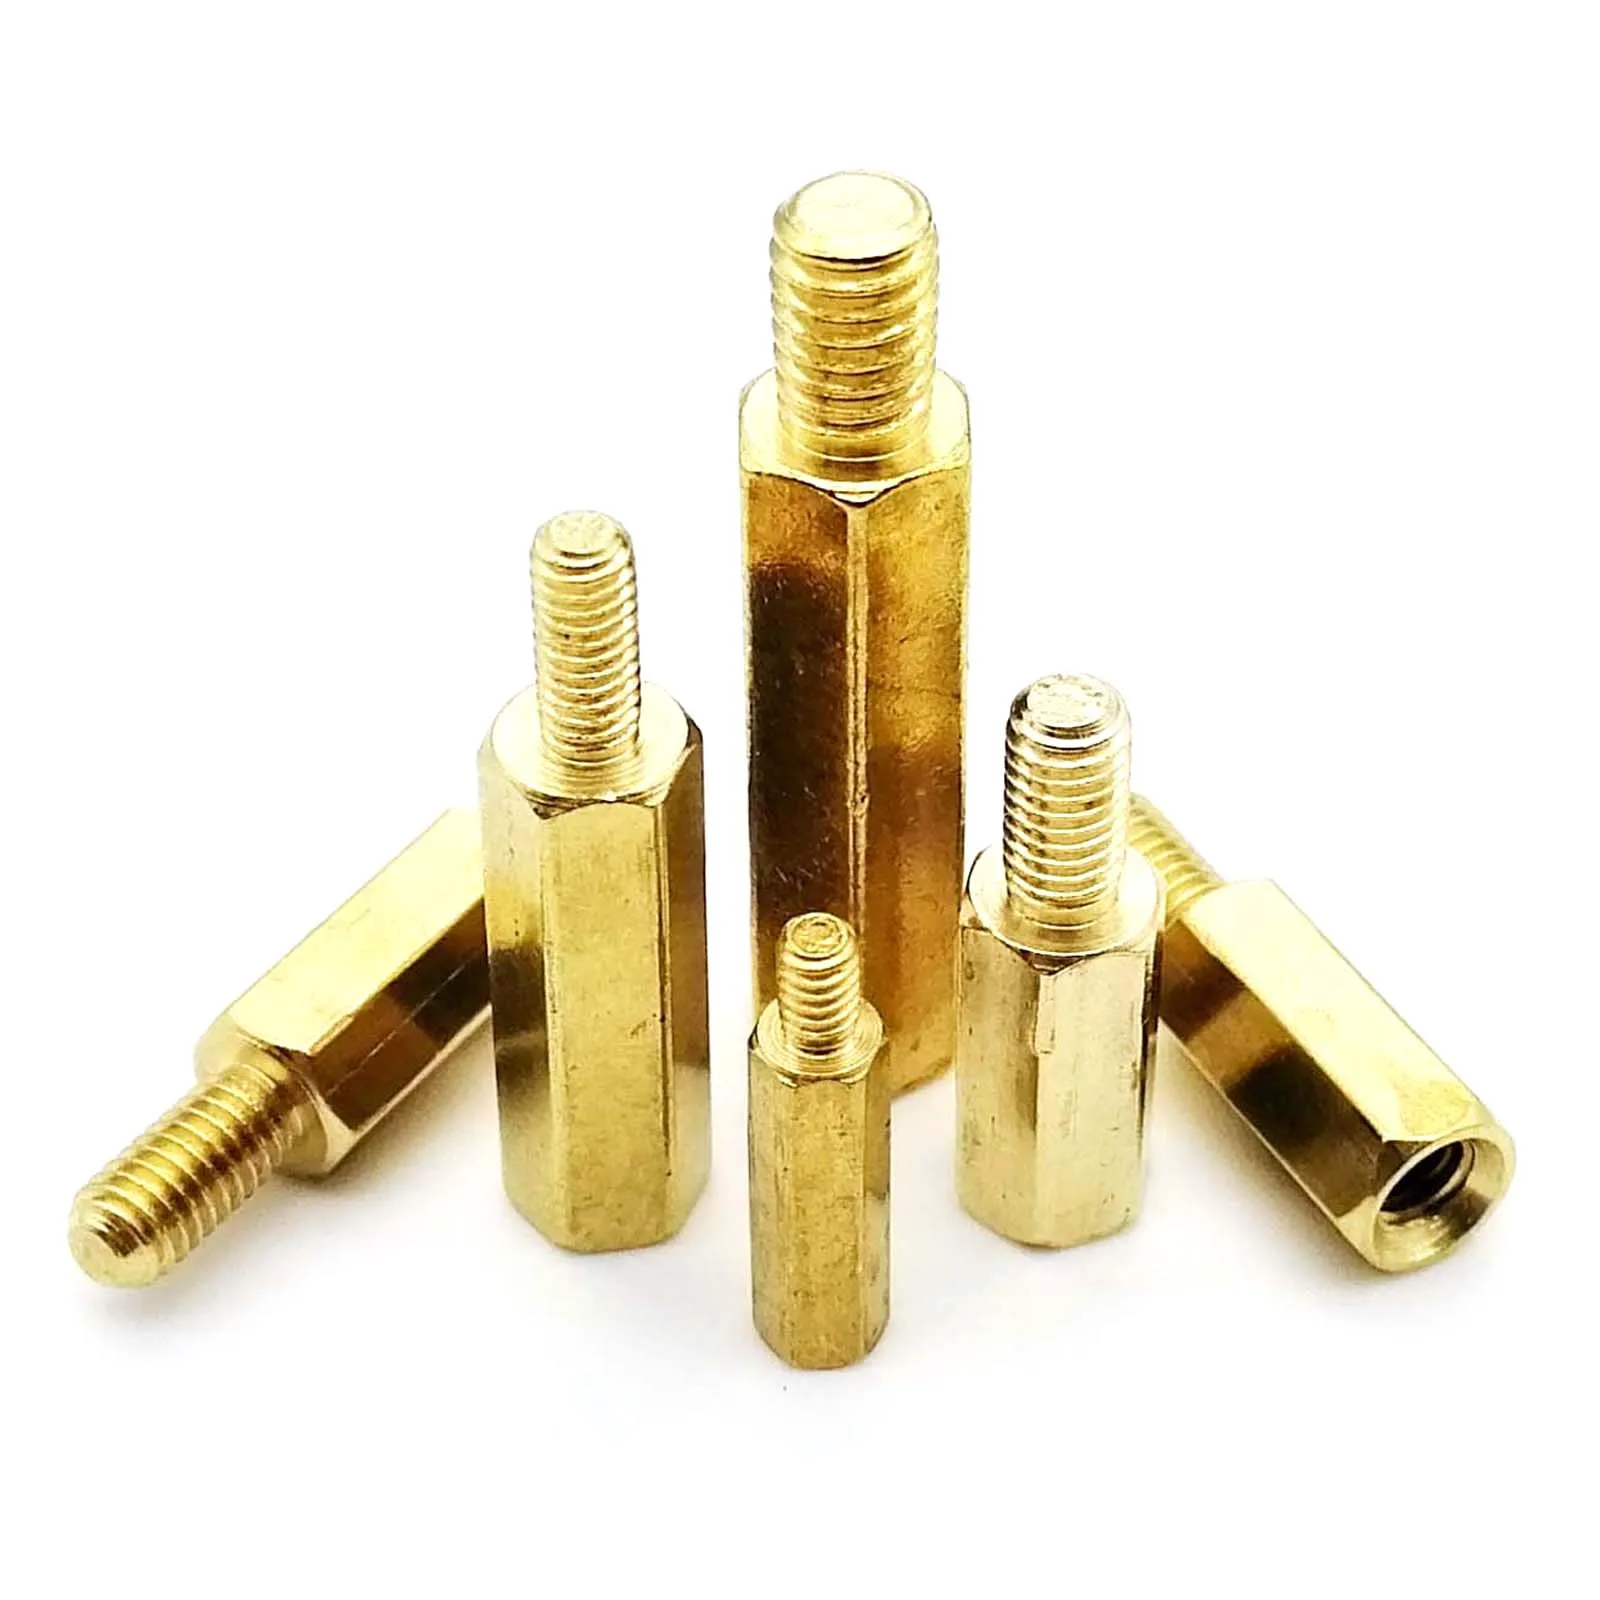 50-100Pcs M2.5x12 Copper Column Male Hexagon Stand-off Spacers 6mm Thread Length 